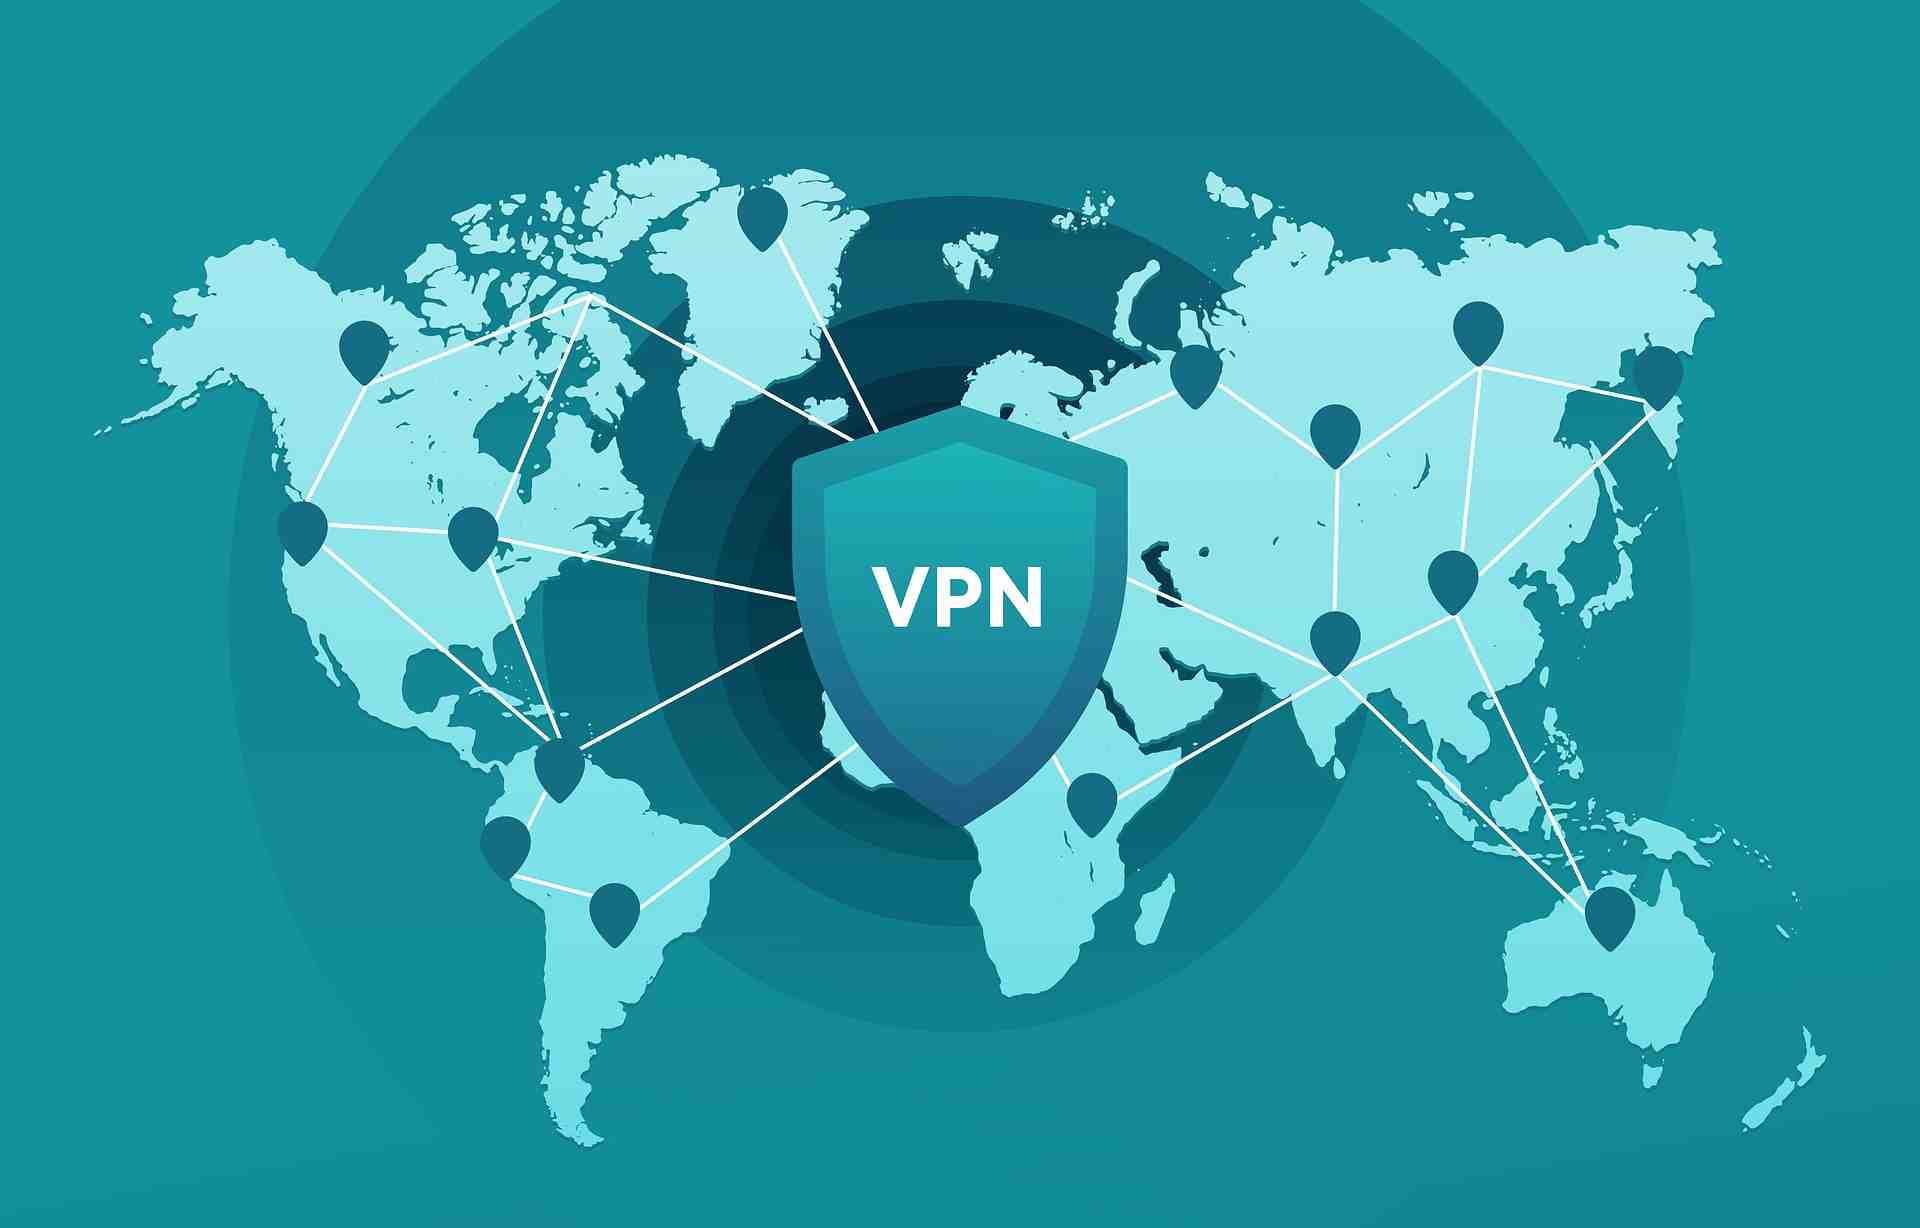 Can the police track you if you use a VPN?